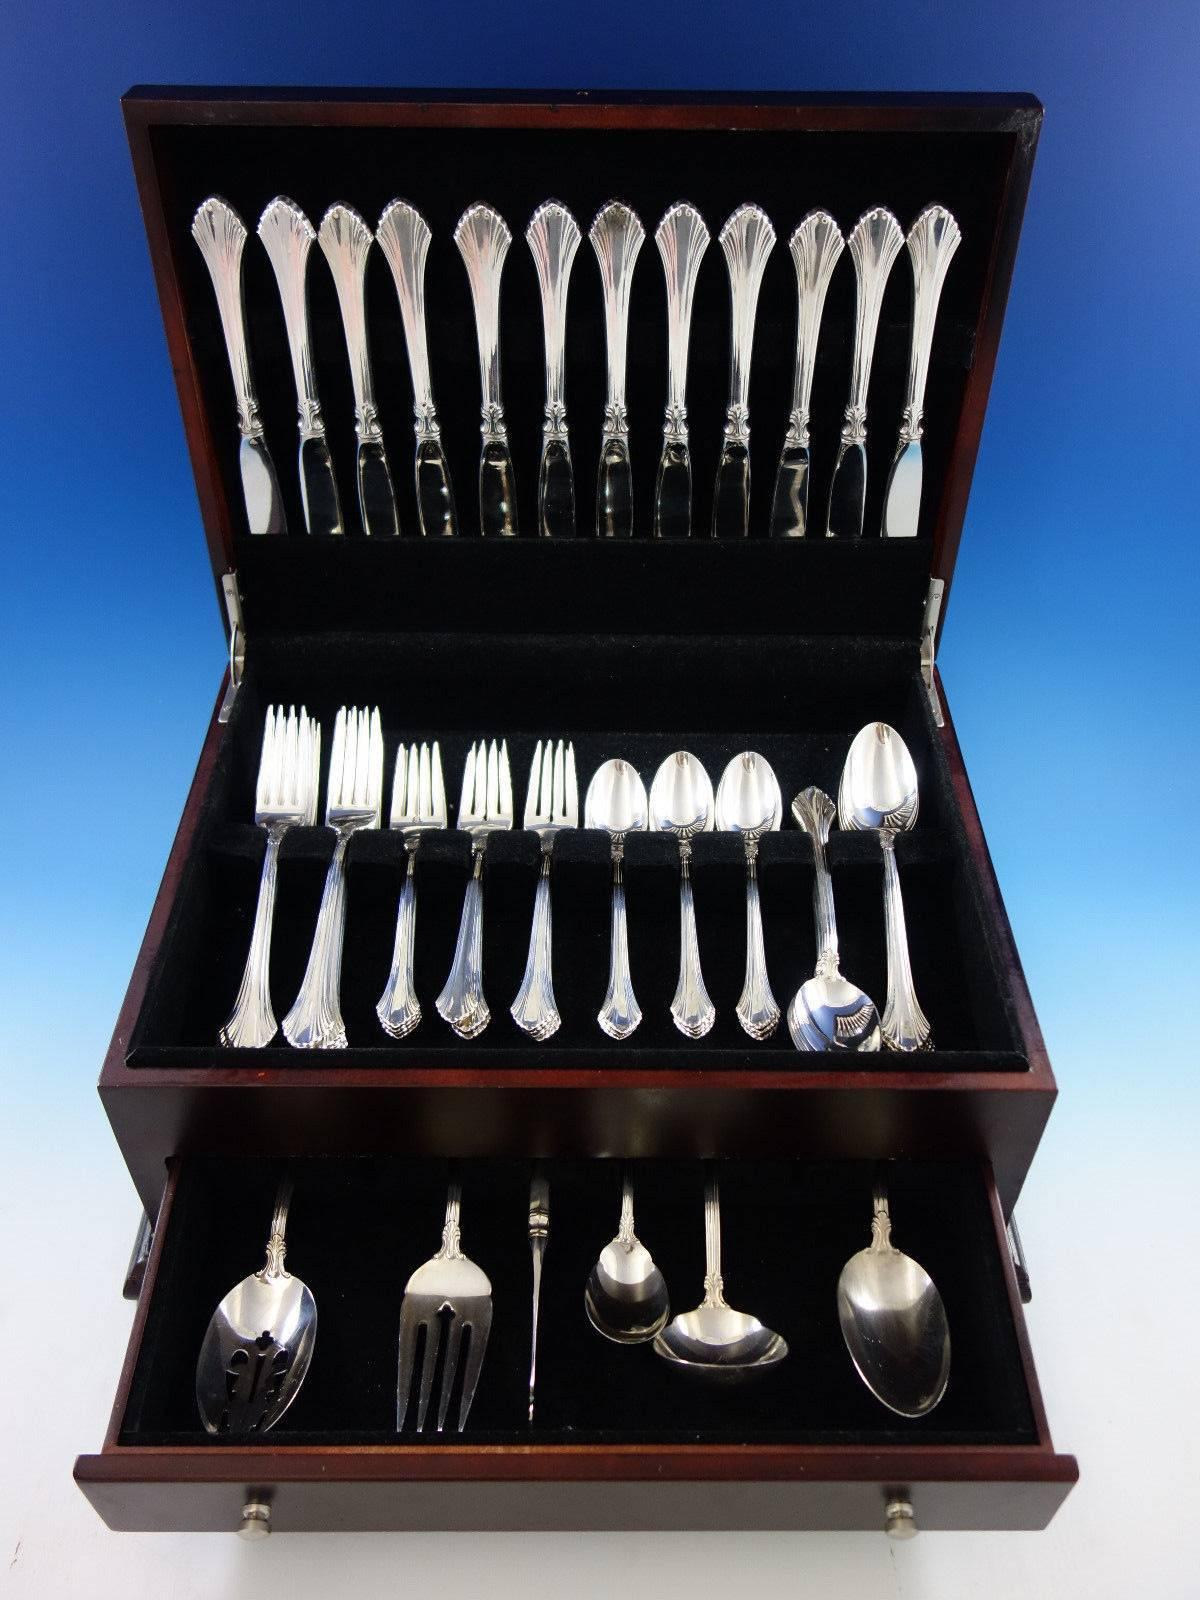 French Regency by Wallace sterling silver flatware set, 66 pieces. This set includes: 

12 knives, 9